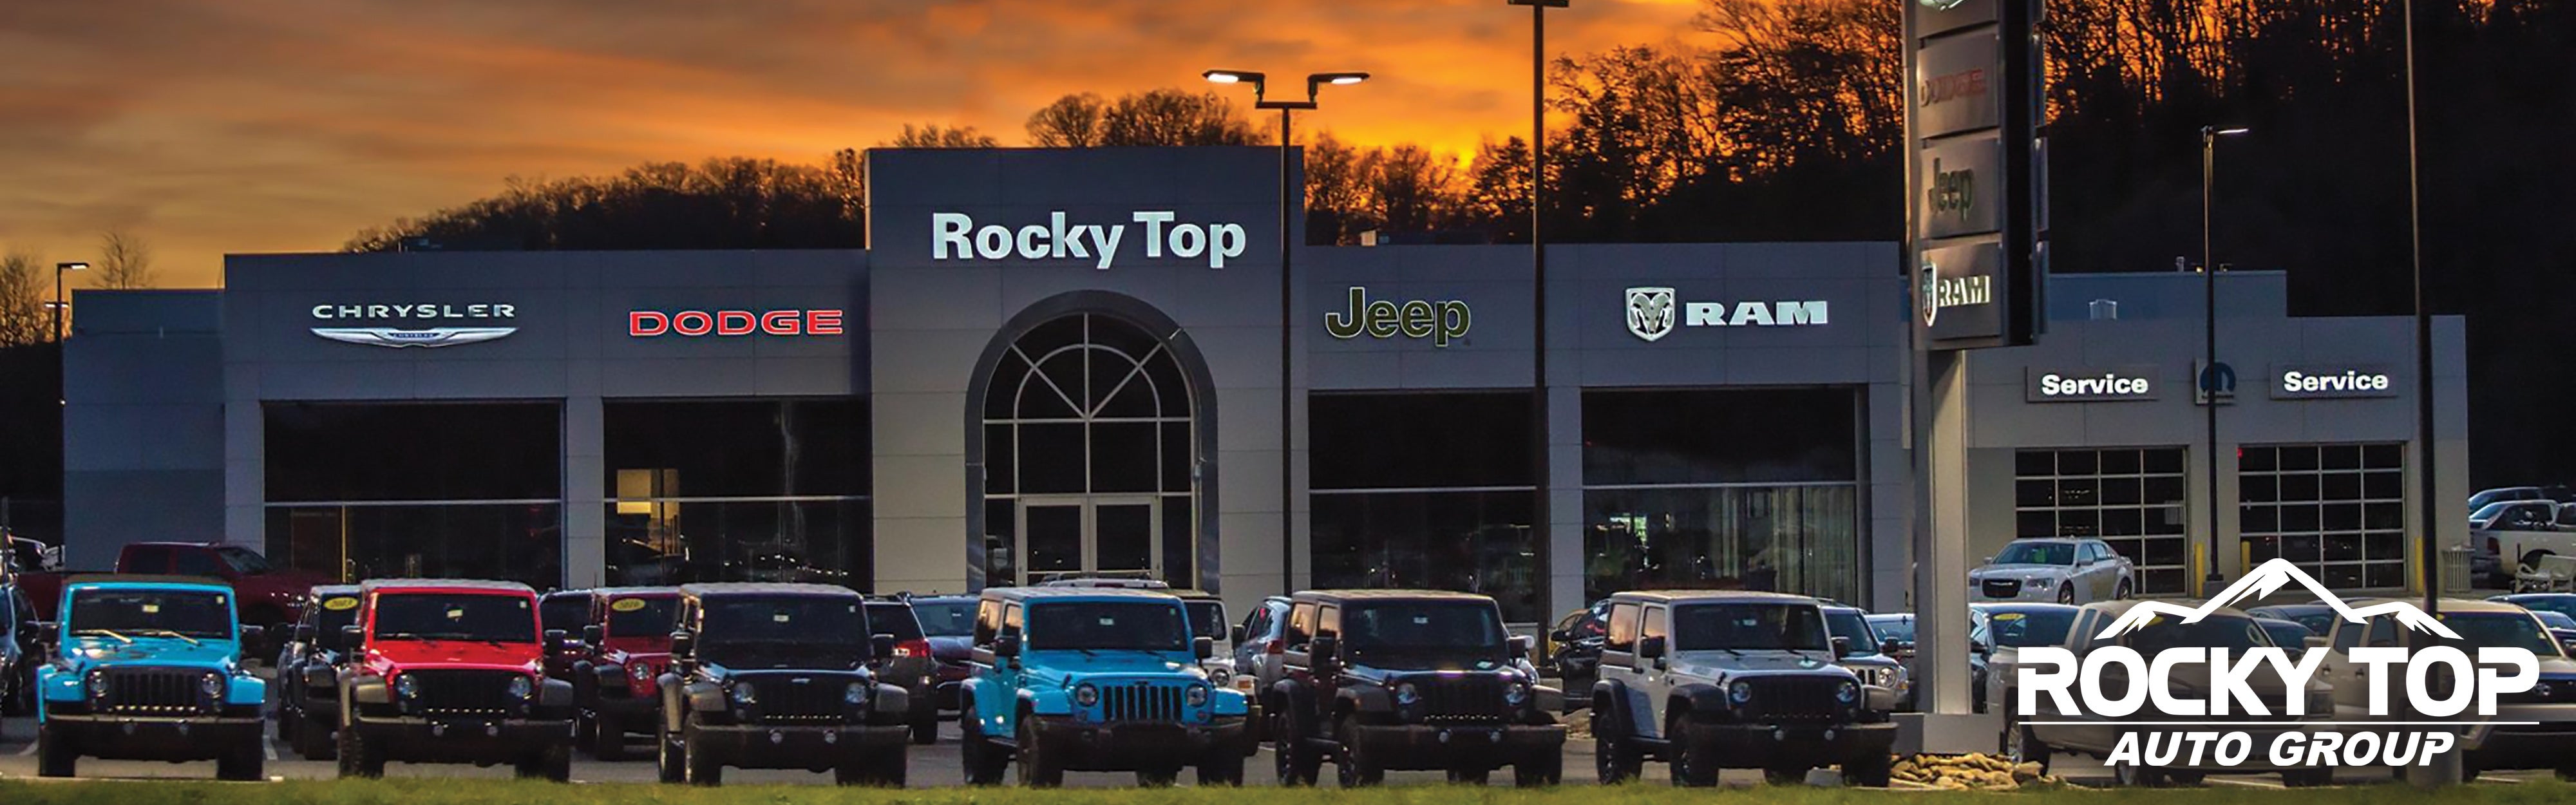 Introduce 41+ images rocky top jeep sevierville tn - In.thptnganamst.edu.vn